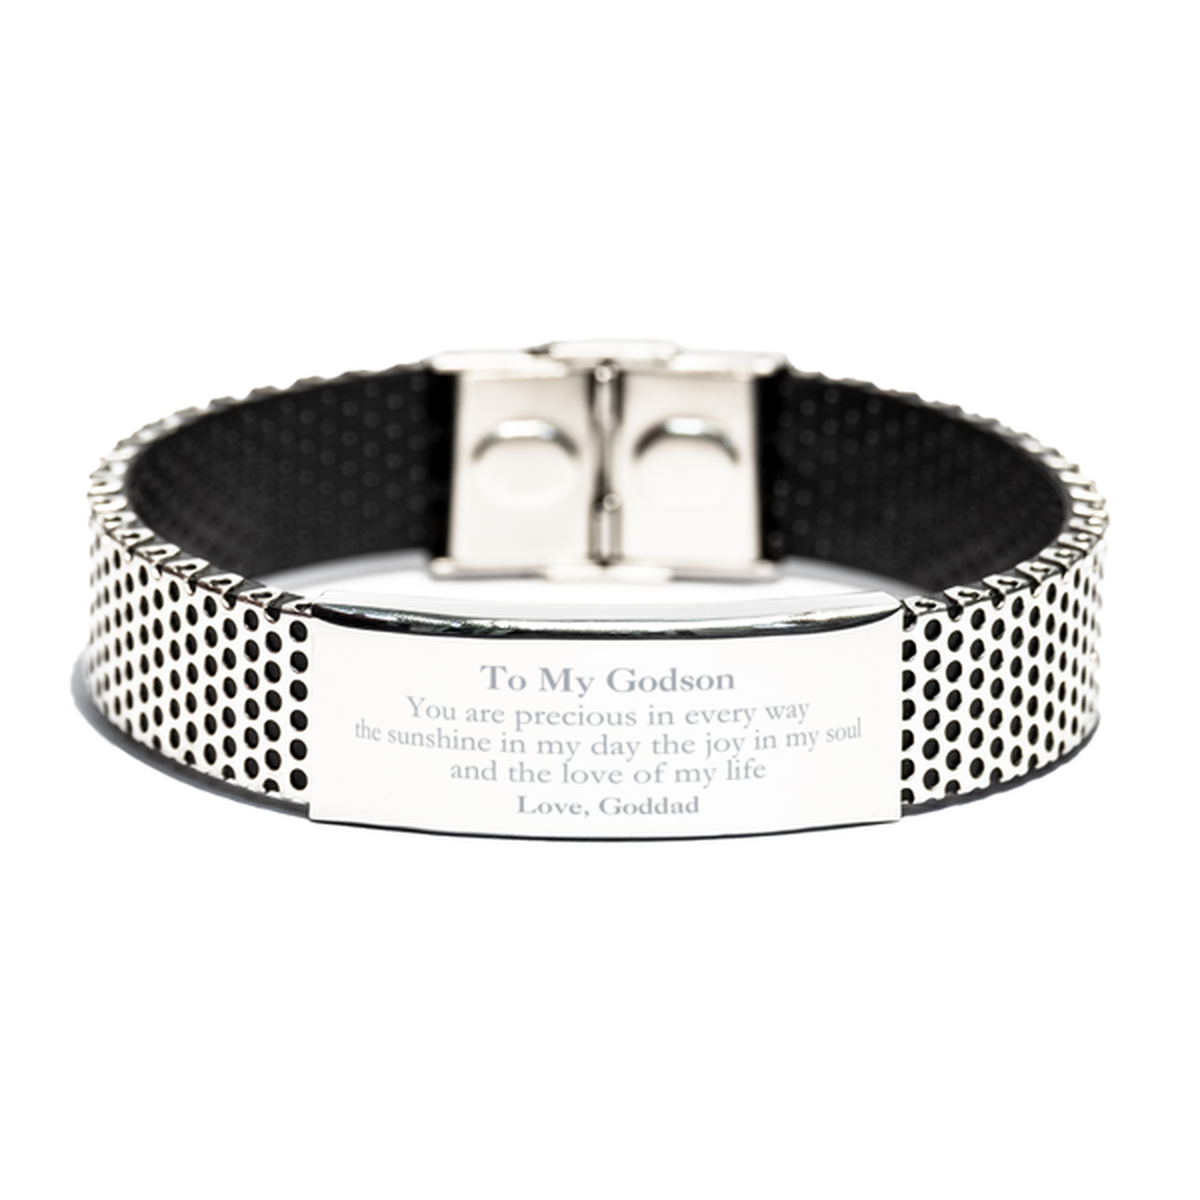 Graduation Gifts for Godson Stainless Steel Bracelet Present from Goddad, Christmas Godson Birthday Gifts Godson You are precious in every way the sunshine in my day. Love, Goddad